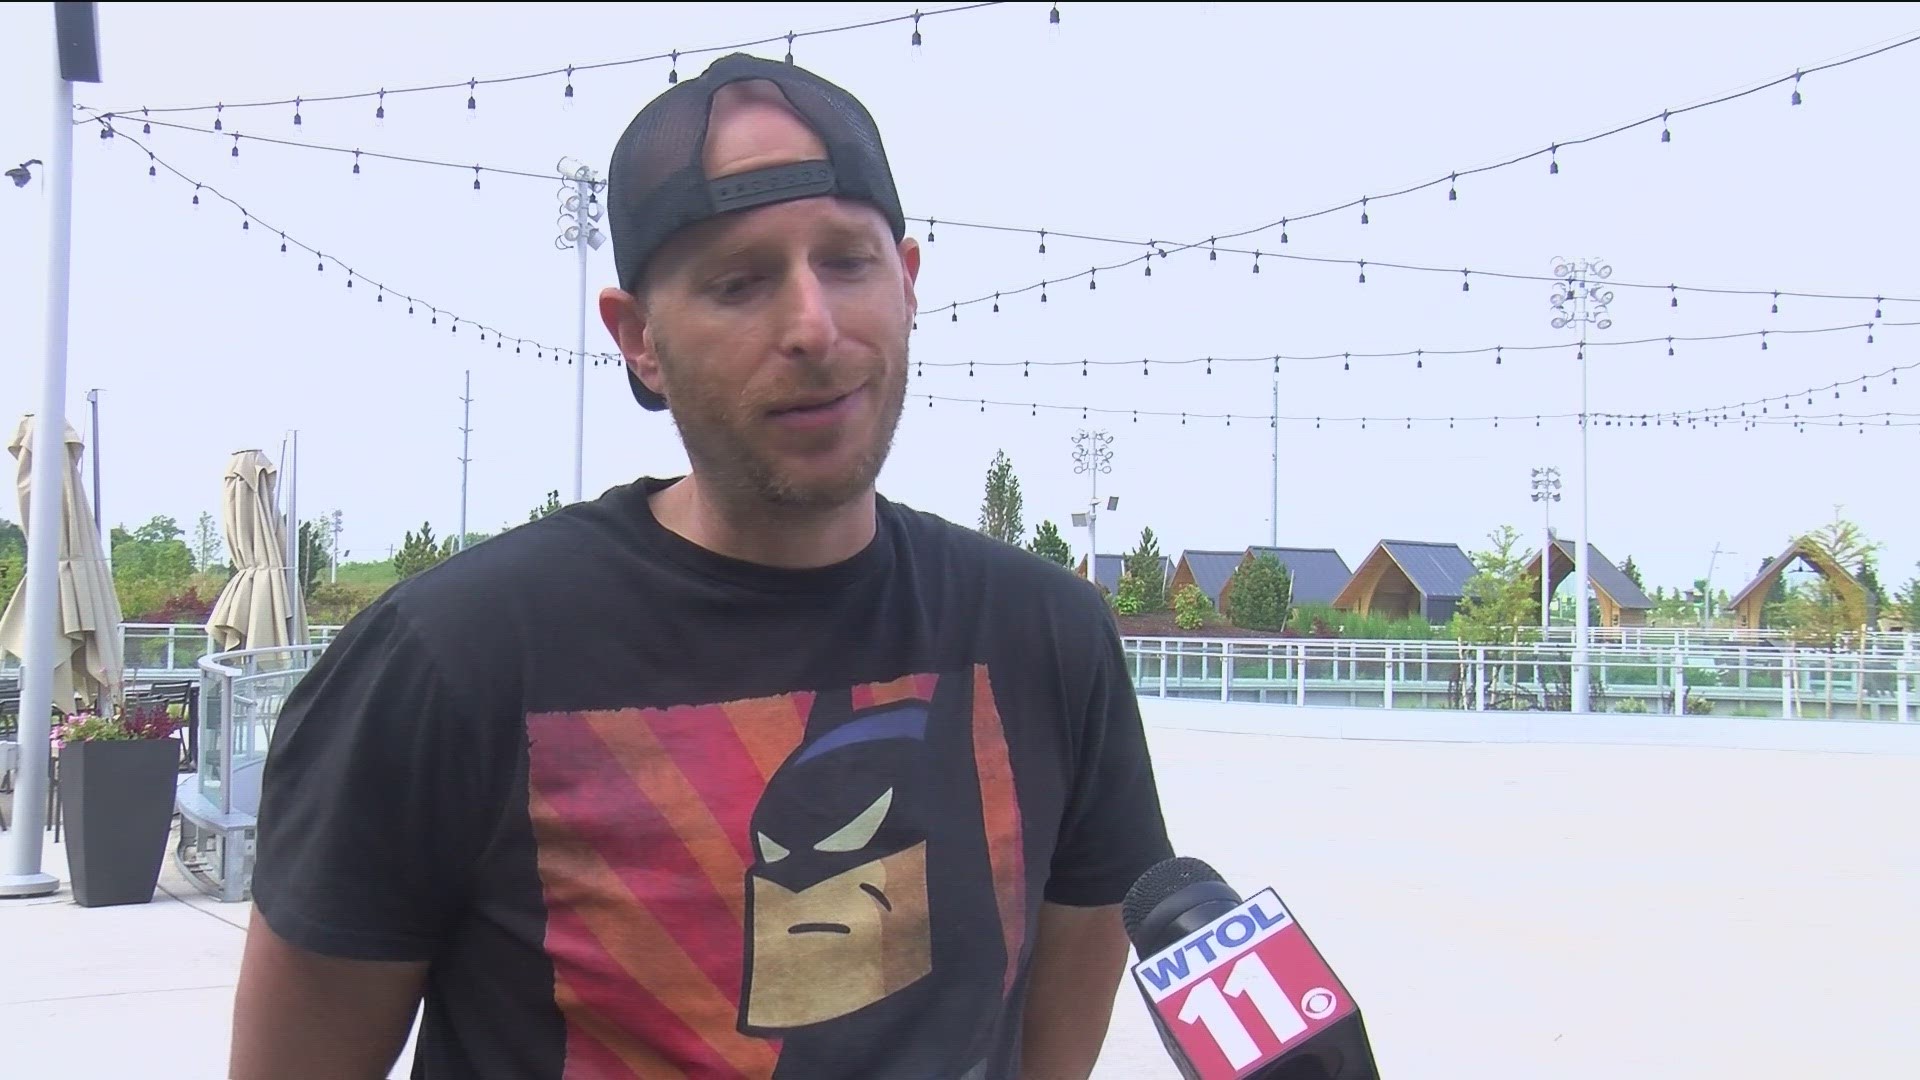 Radio host Eric Chase hosted a retro skate party to benefit Lucas County Children Services.